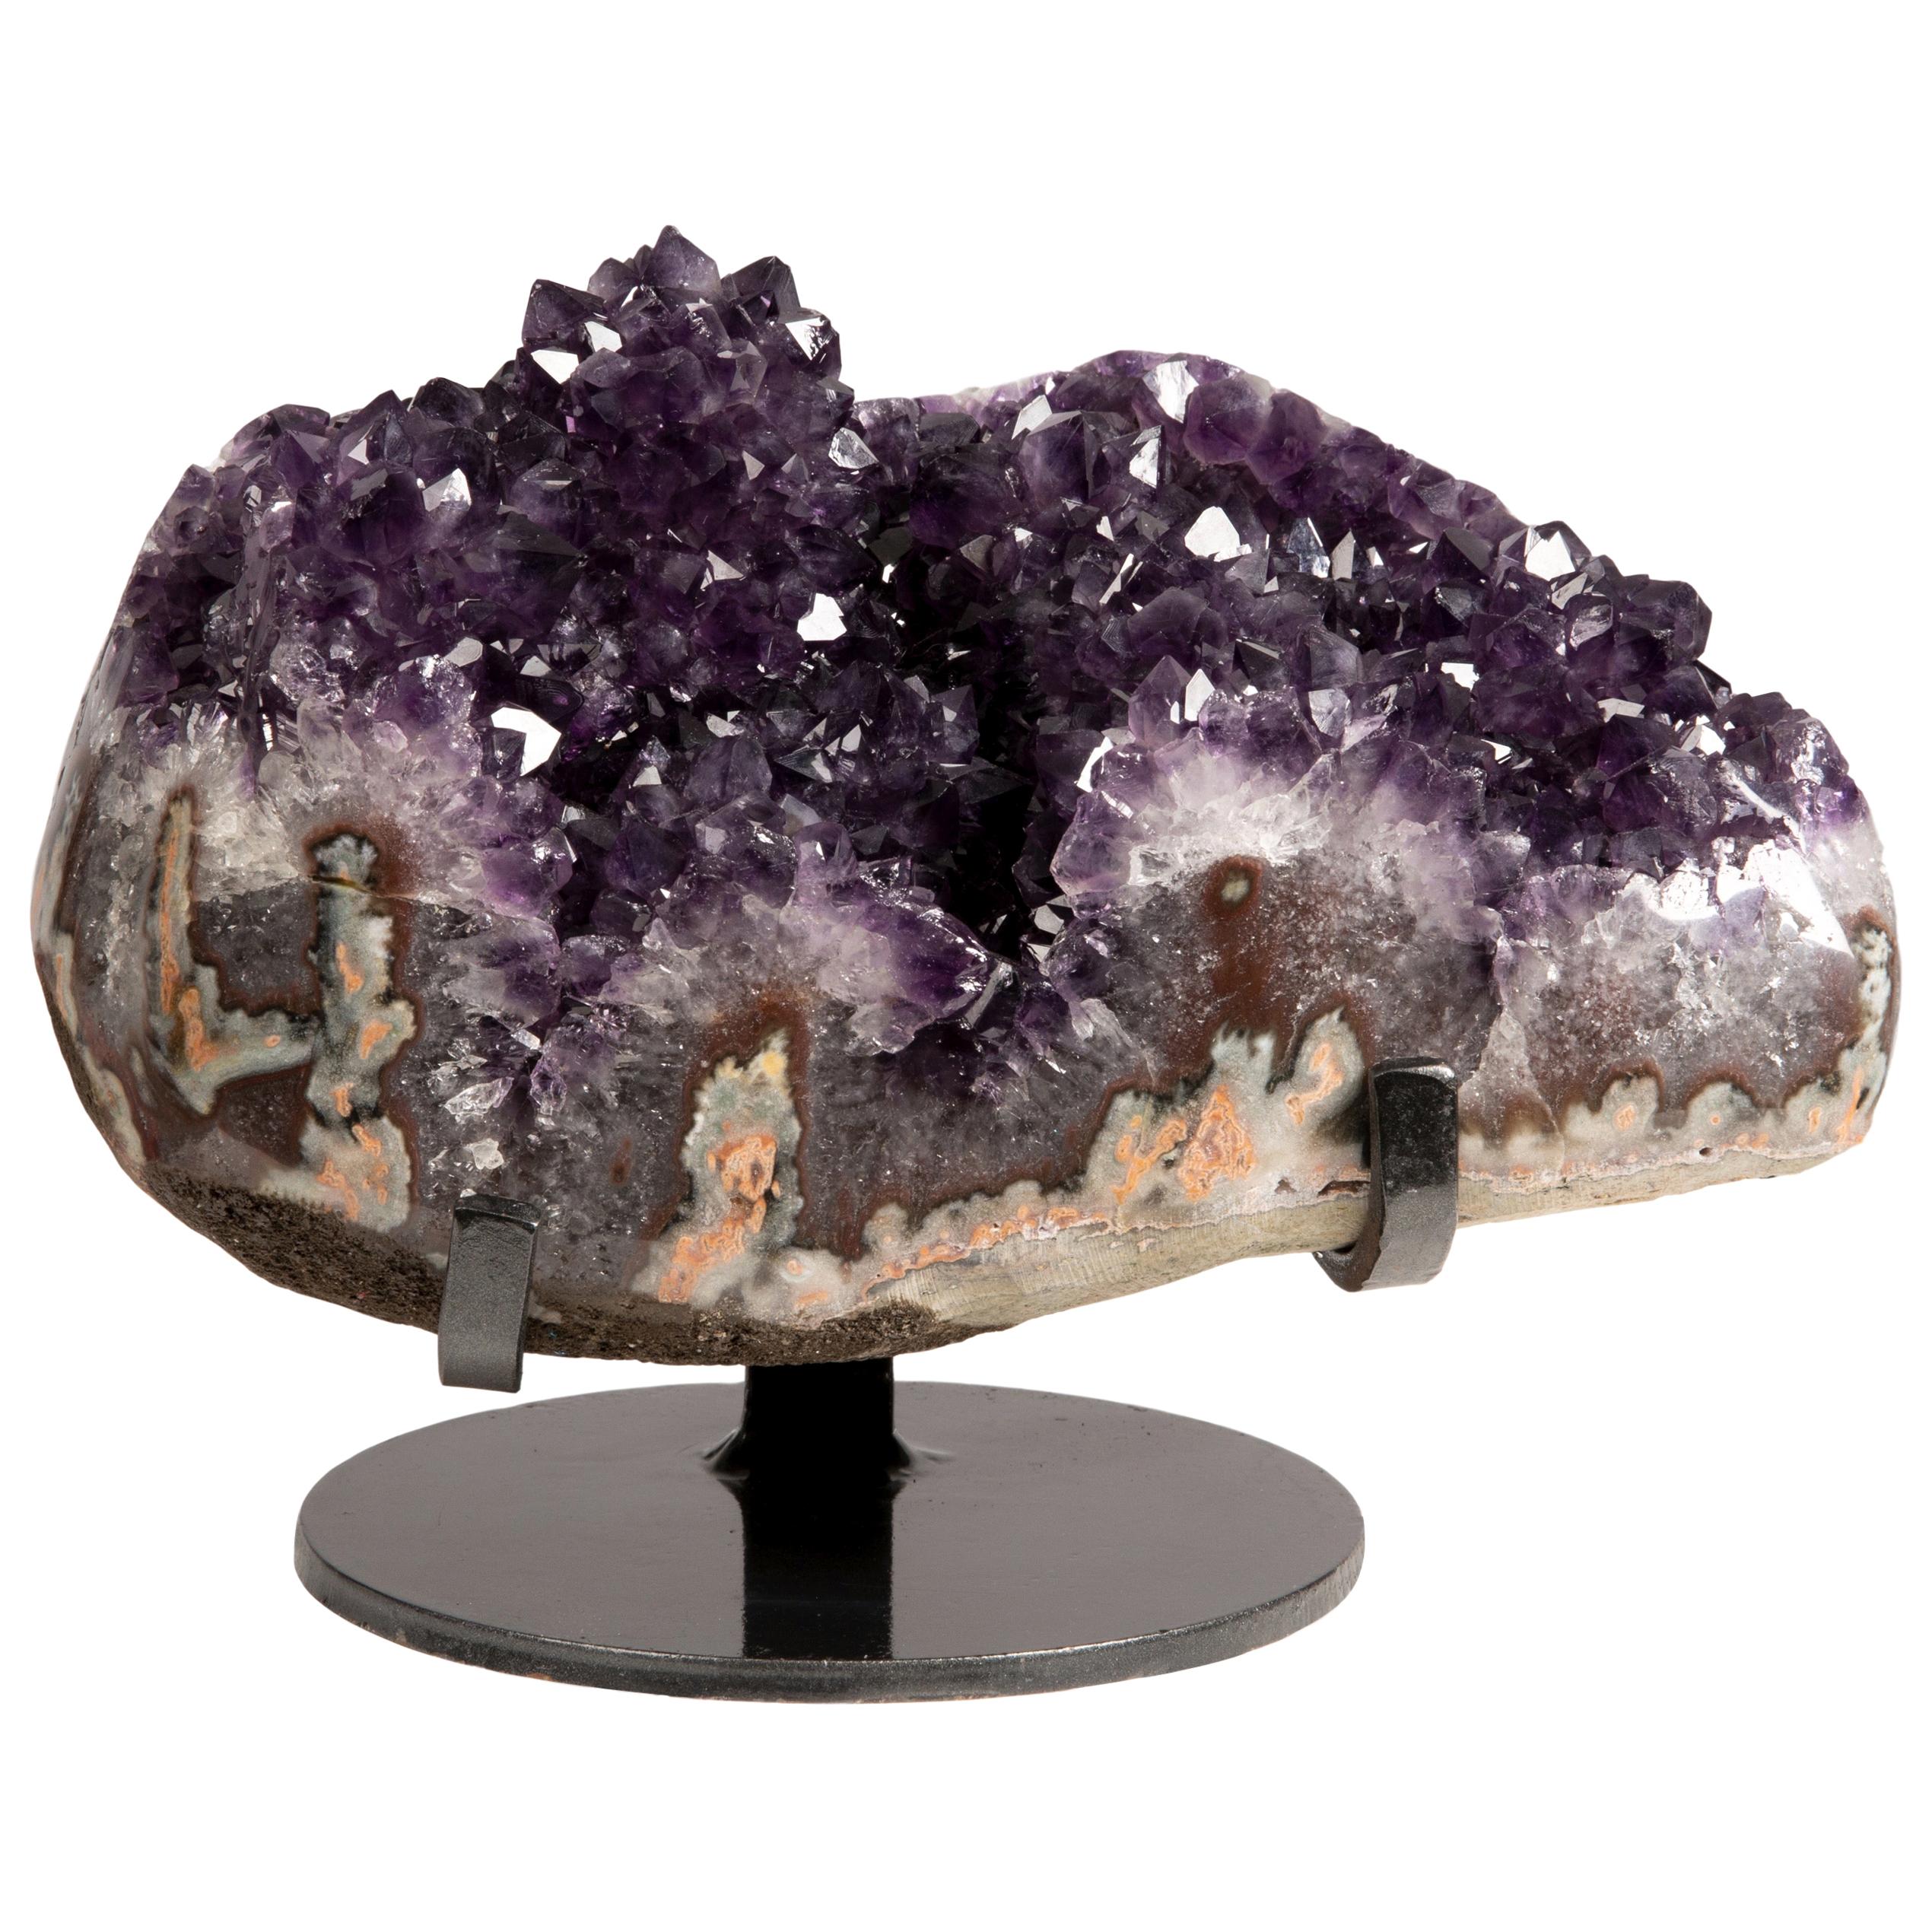 Small Cluster of Amethyst Stalactite Formations - Mineral Display piece